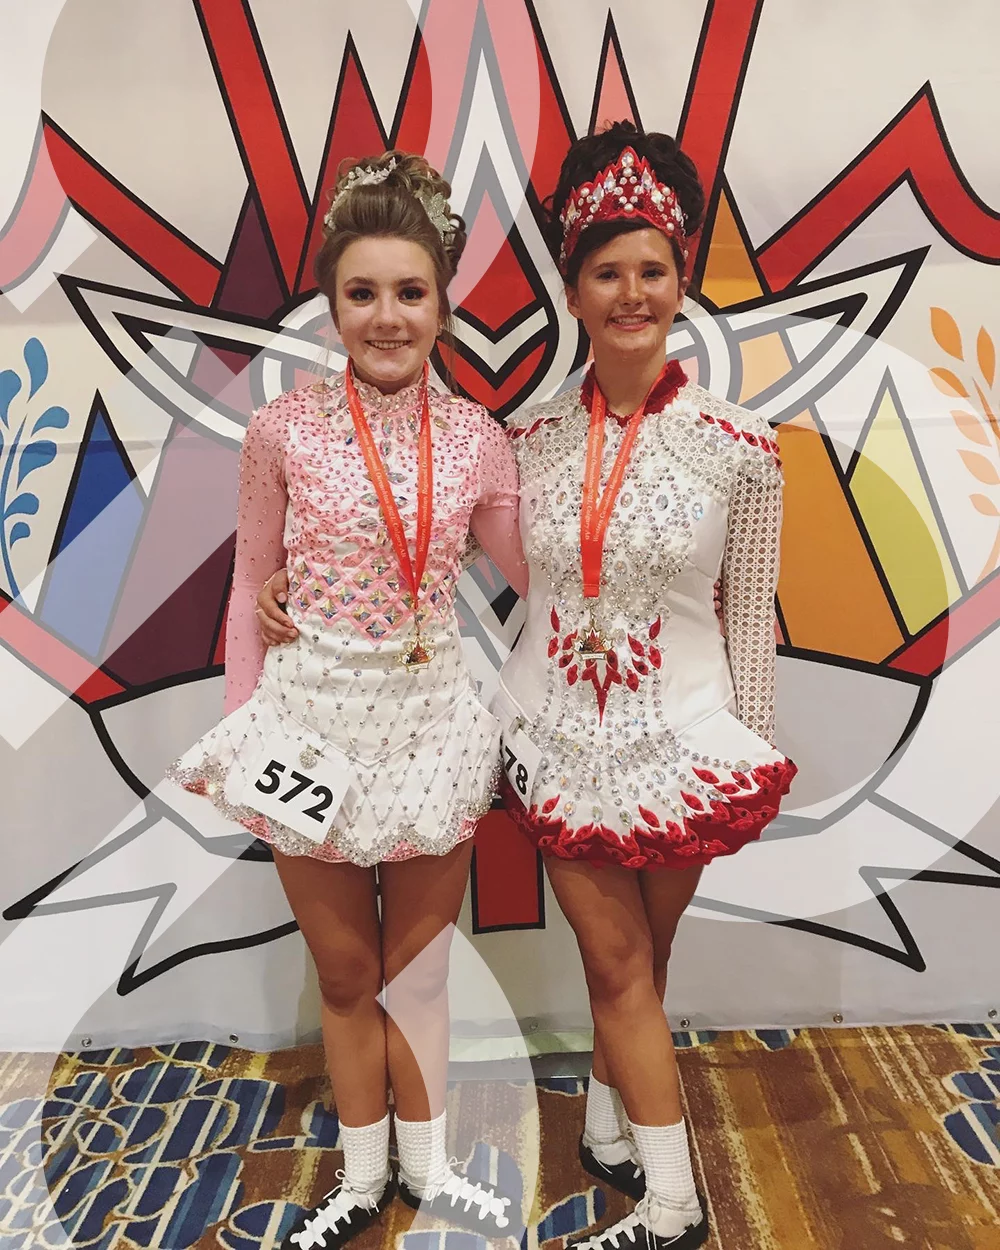 Two teeange girls in sparkly Irish dance solo dresses stand in front of a logo shaped like the Canadian Maple leaf. Both are wearing medals shaped like the same Maple Leaf logo. The IDTANA logo is woven throughout.